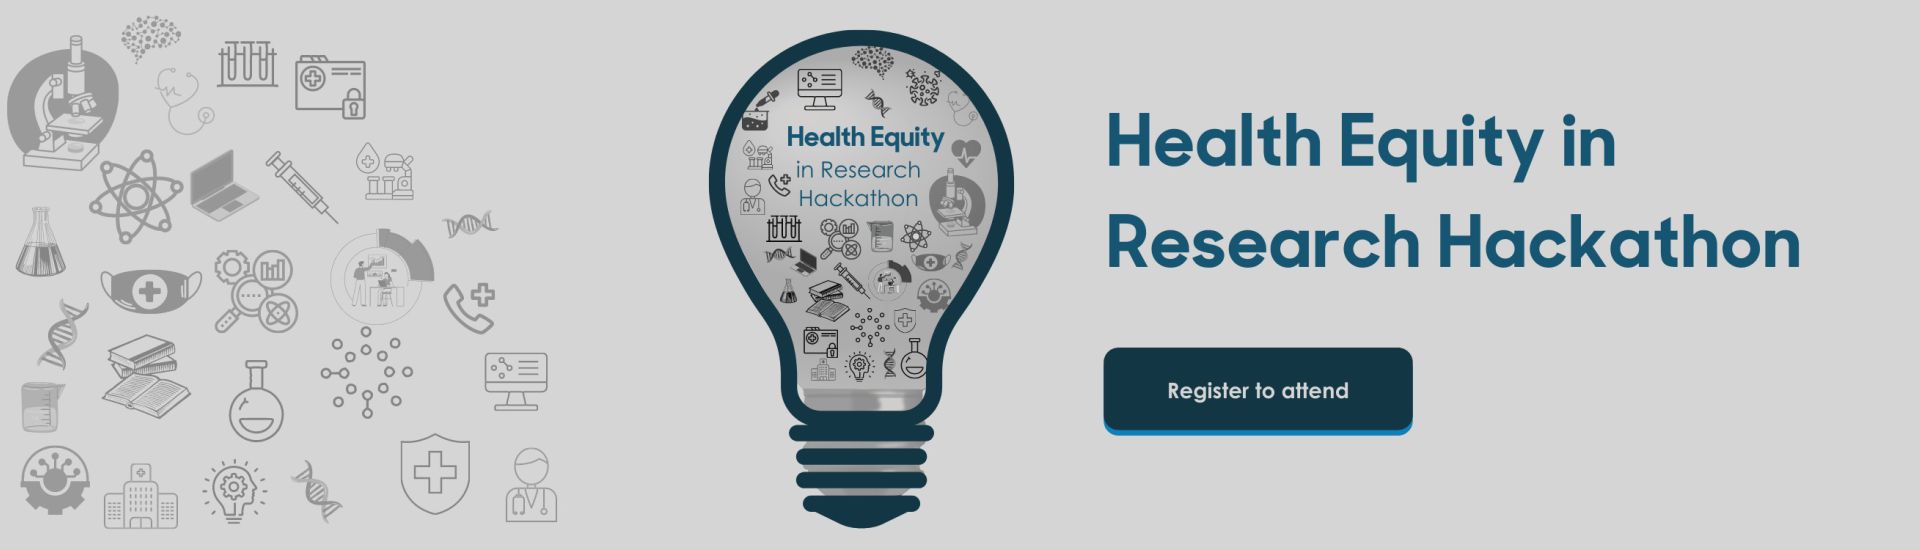 Health Equity in Research Hackathon - Register Now